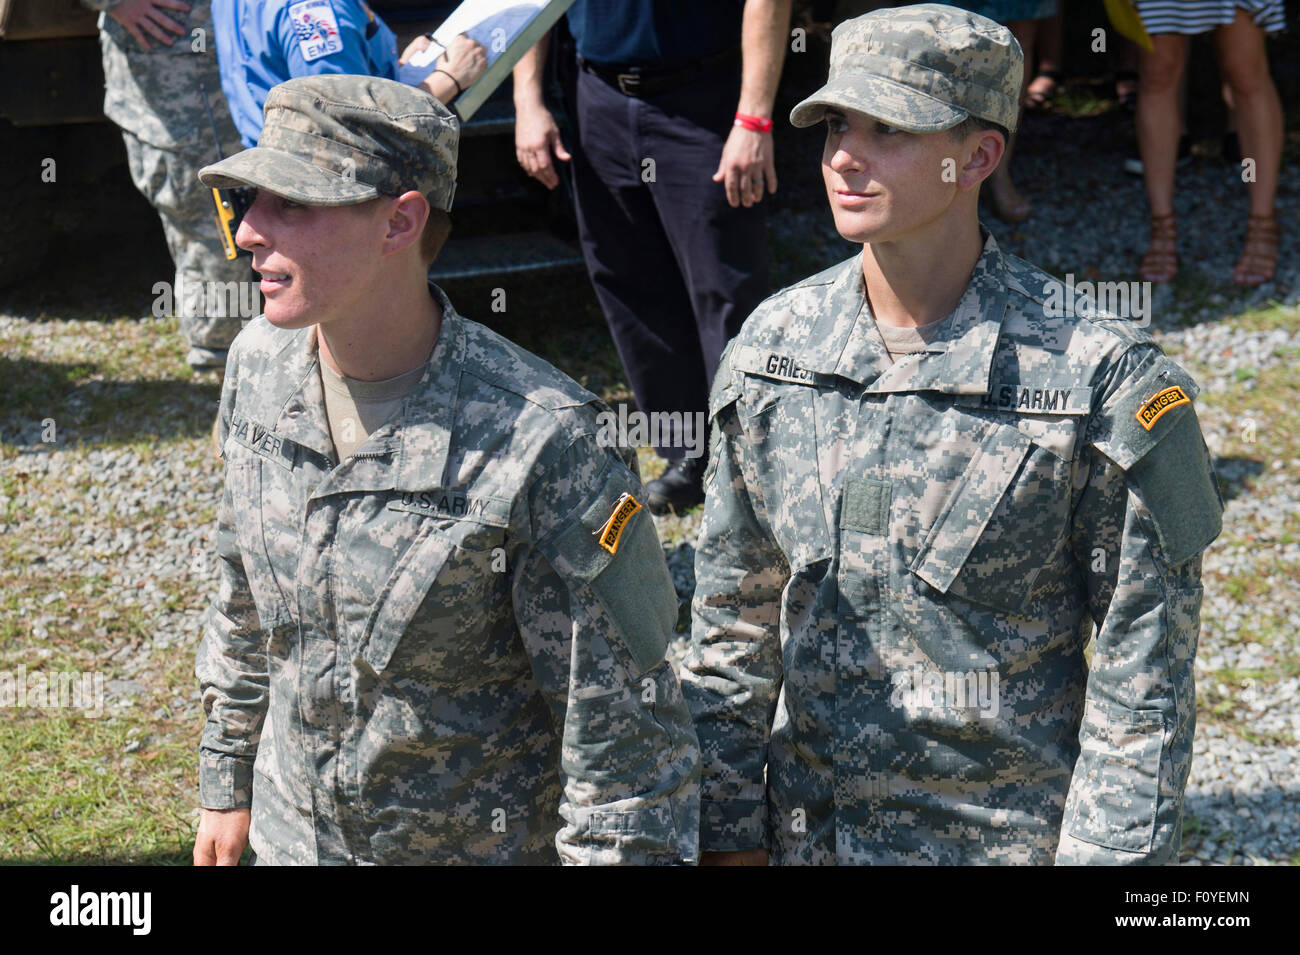 U.S. Army 1st Lt. Shaye Haver, left, and fellow soldier Captain Kristen Griest after graduation ceremonies at the Army Ranger school August 21, 2015 at Fort Benning, Georgia. Haver and fellow soldier 1st Lt. Kristen Griest became the first women to graduate from the 61-day-long Ranger course considered one of the most intense and demanding in the military. Stock Photo